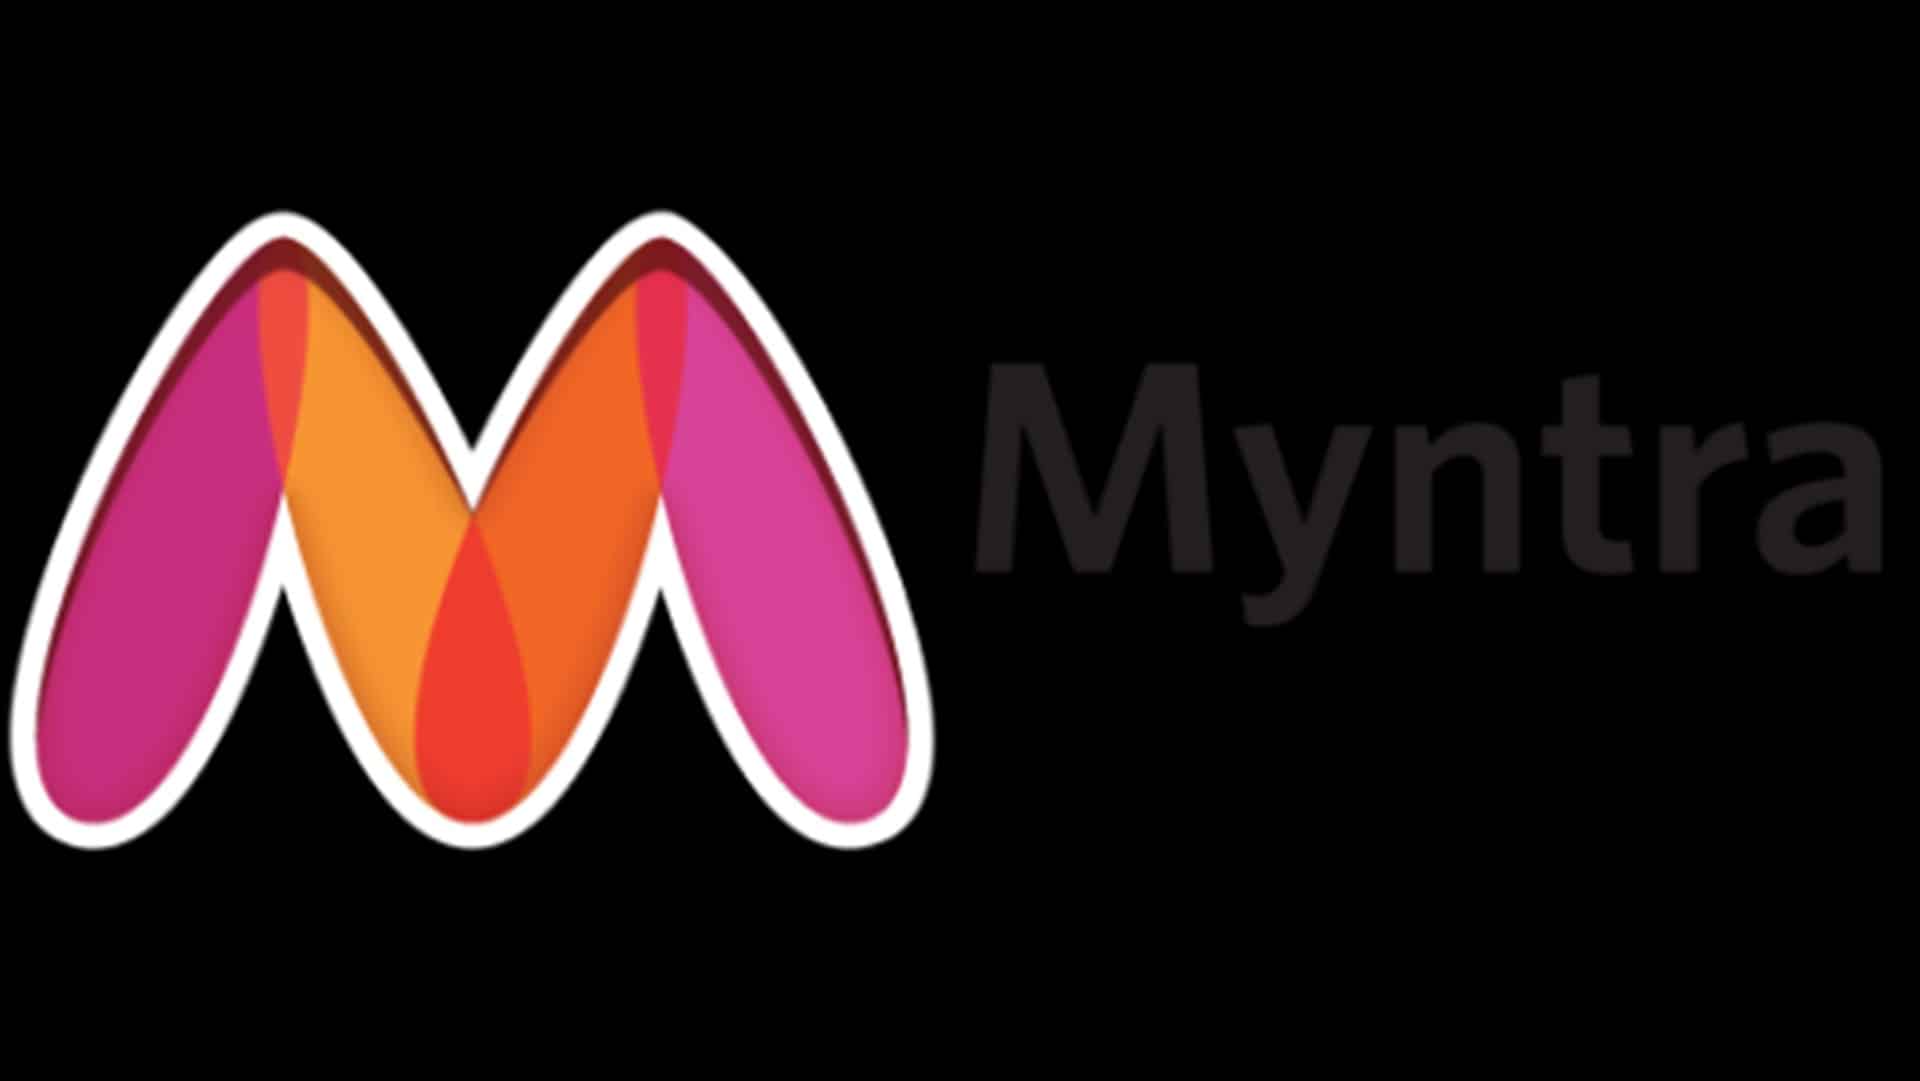 Fashion ecommerce platform Myntra partners with Better Cotton Initiative